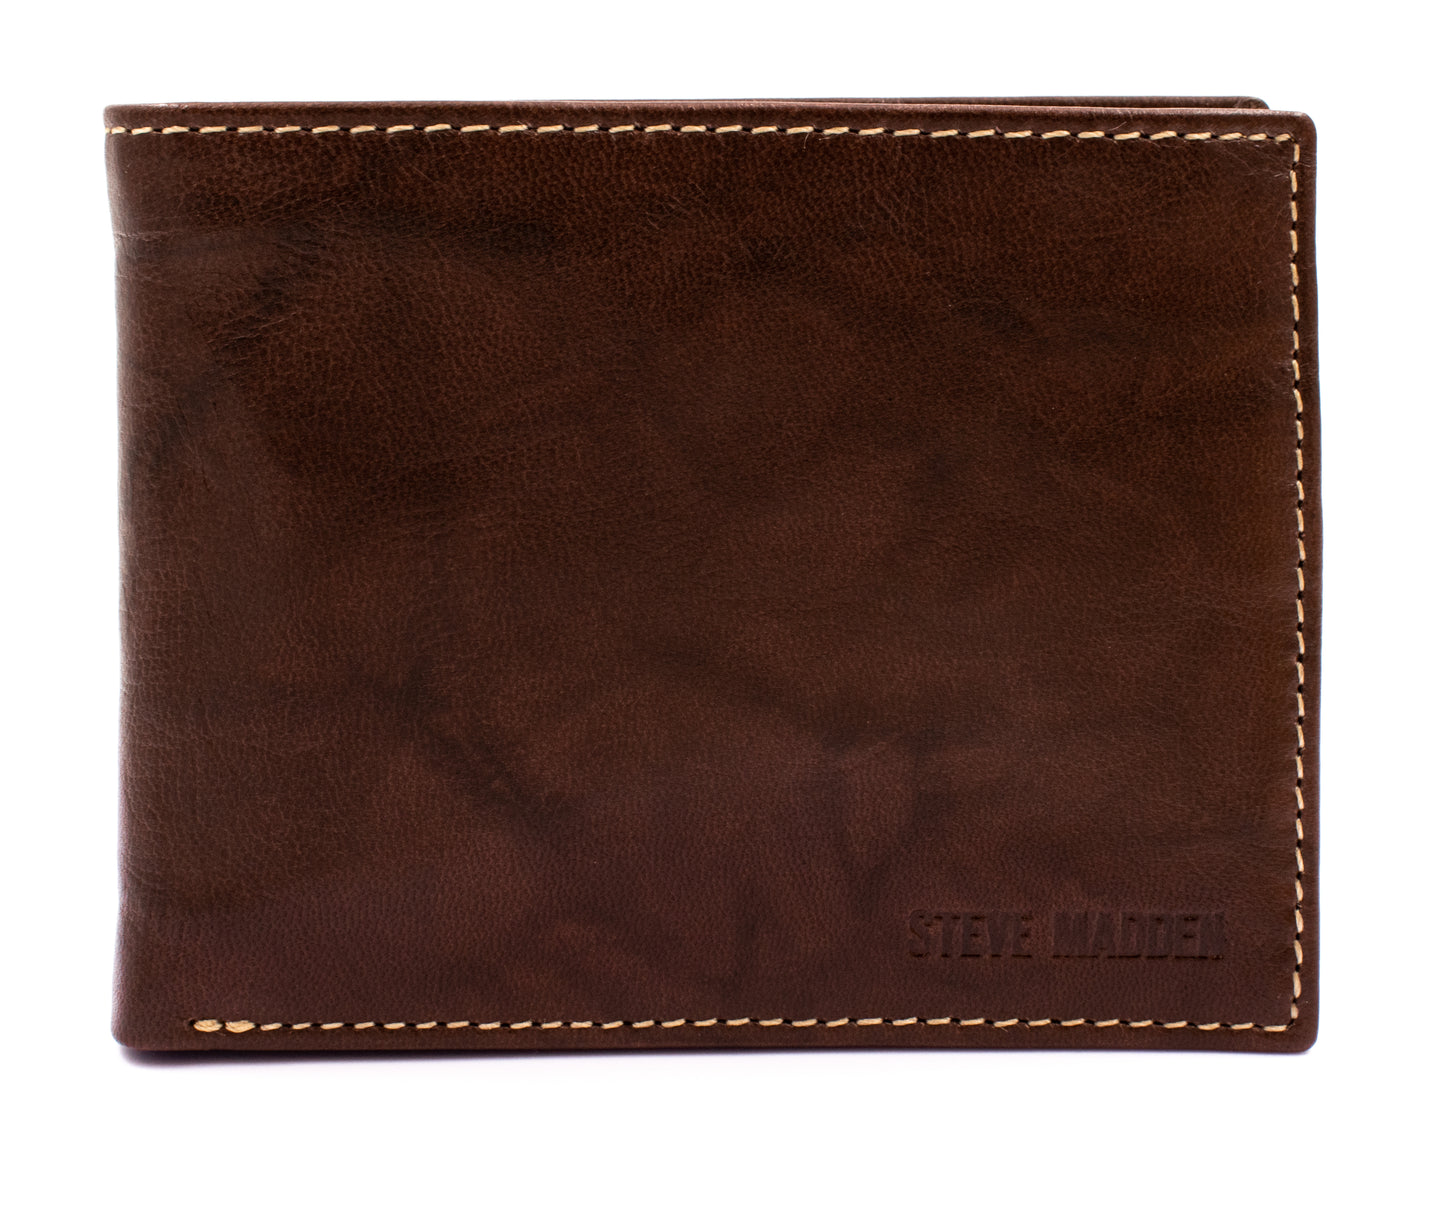 Brown wallet with 8 card slots, 1 mesh slot for your ID, and 1 large billfold compartment and RFID blocking technology